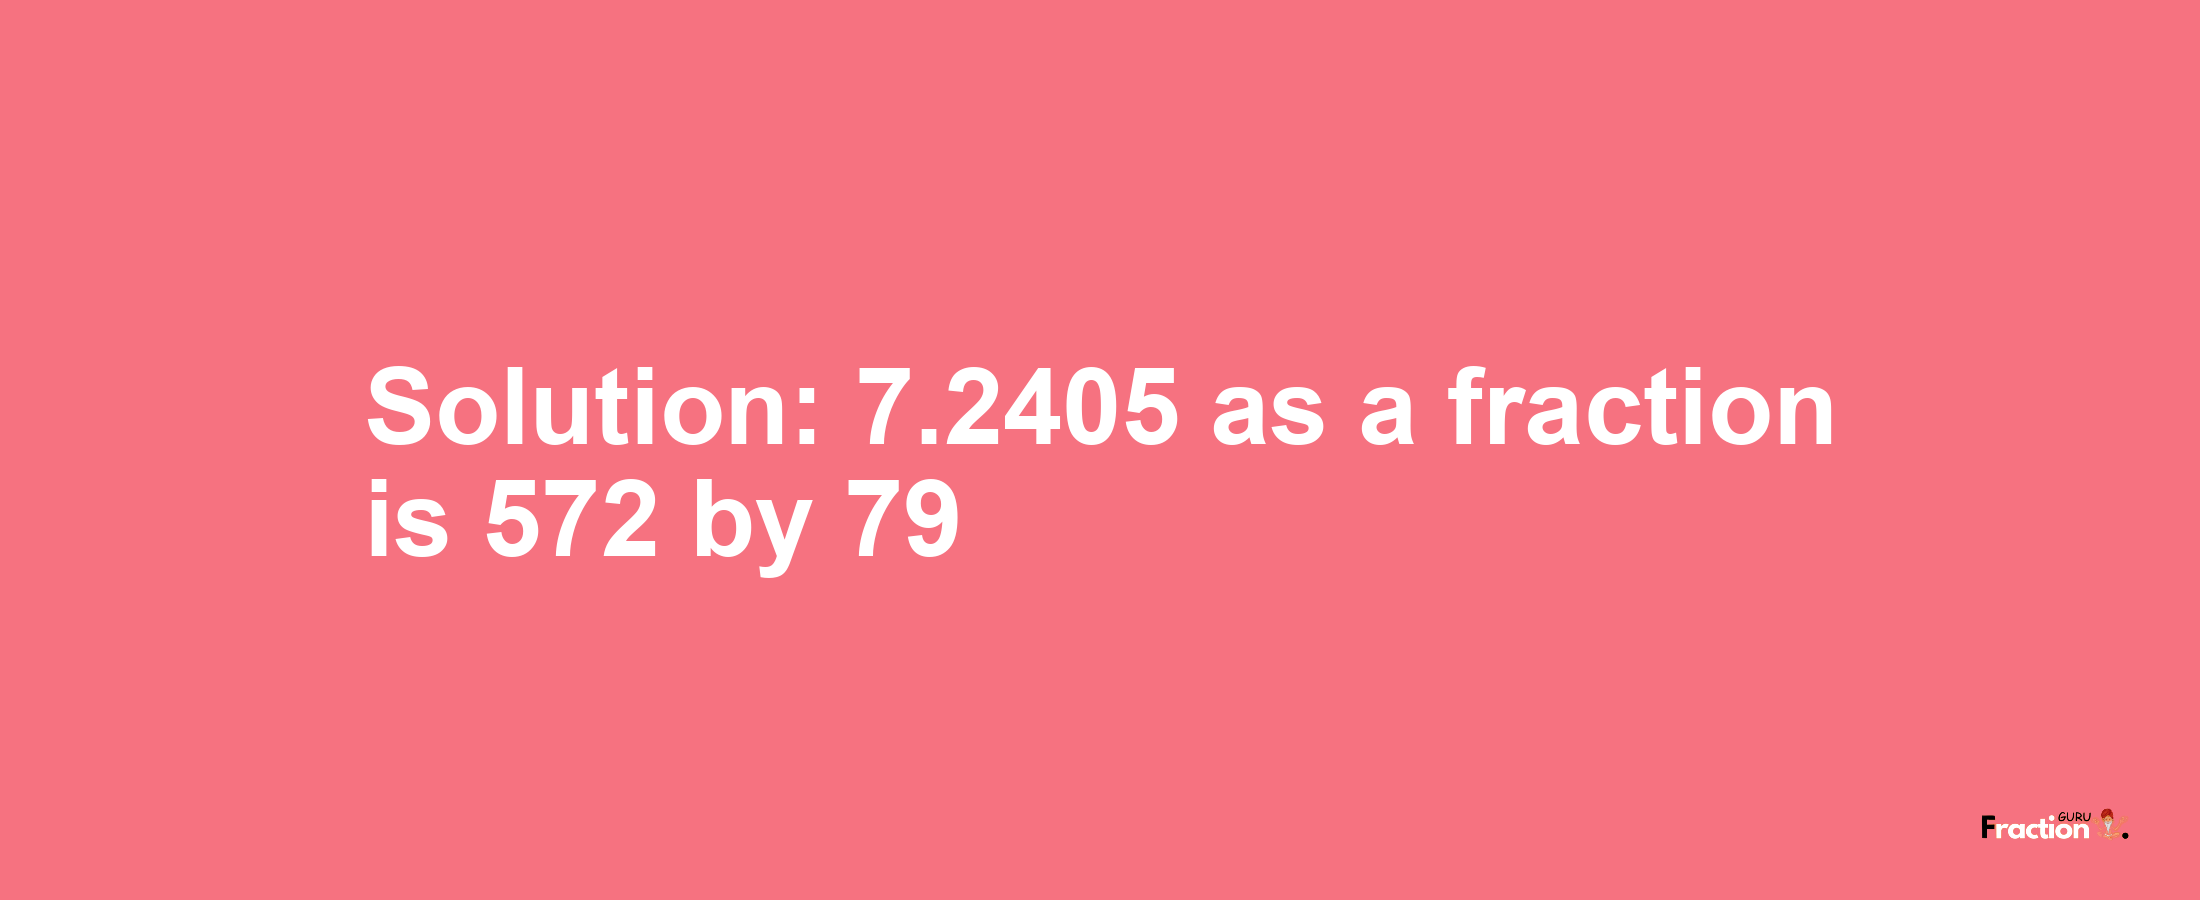 Solution:7.2405 as a fraction is 572/79